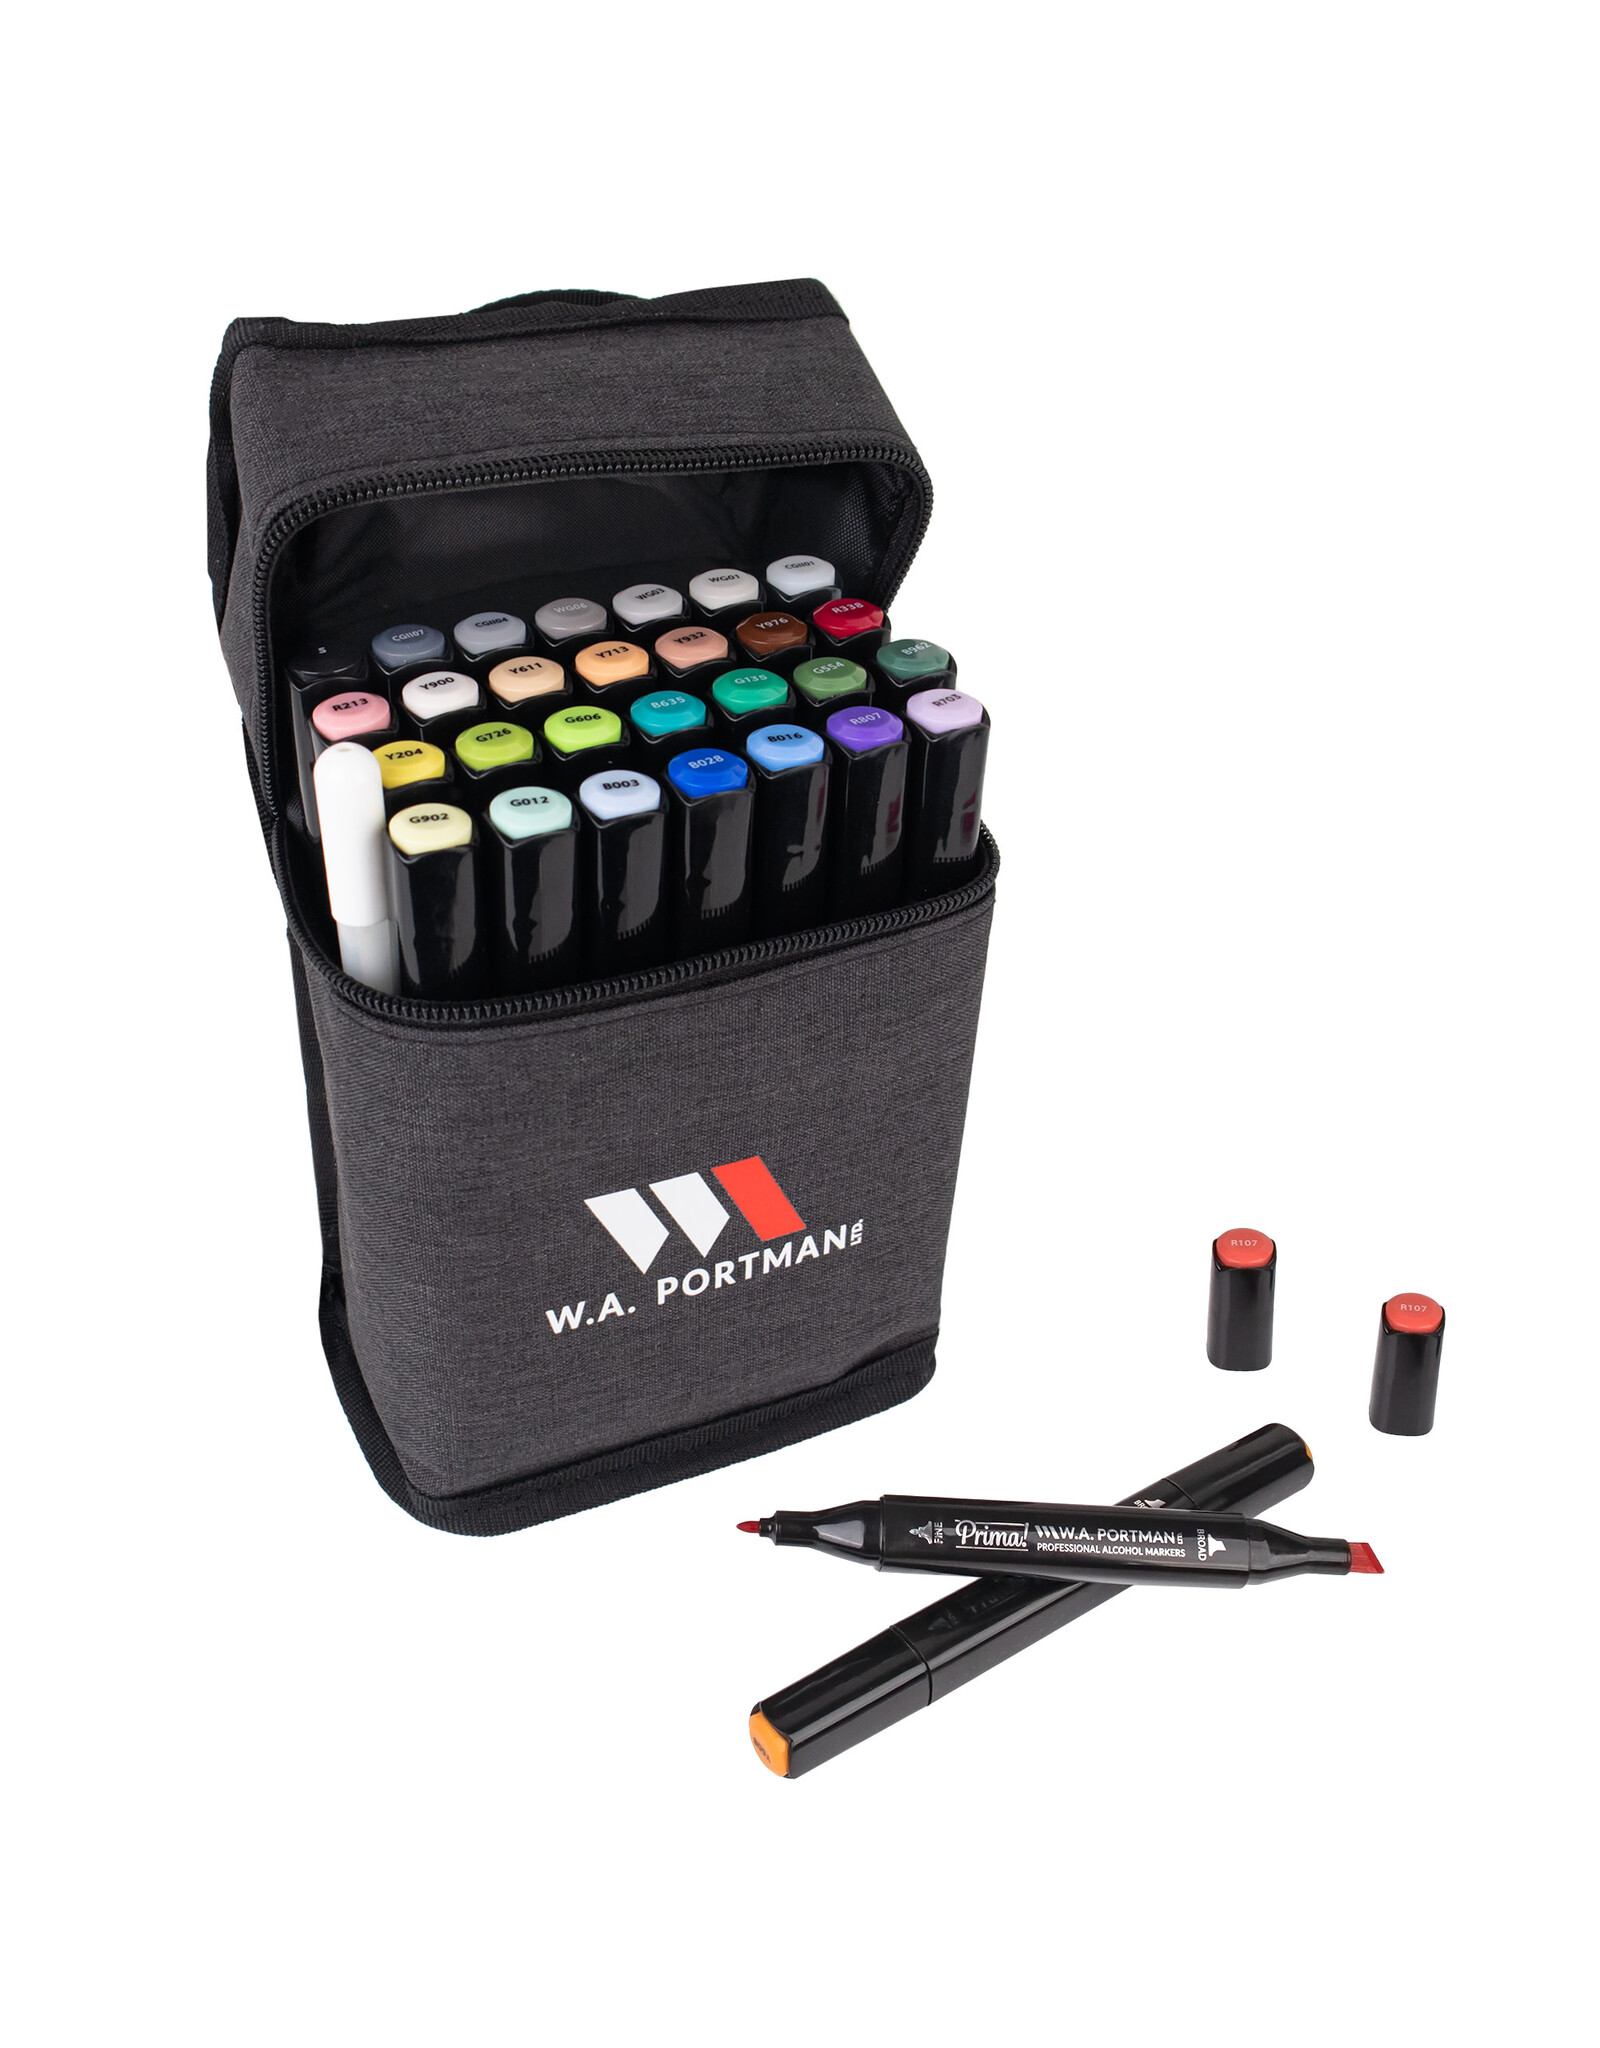 Artist Loft Markers Review: Our Experience with This Art Supply